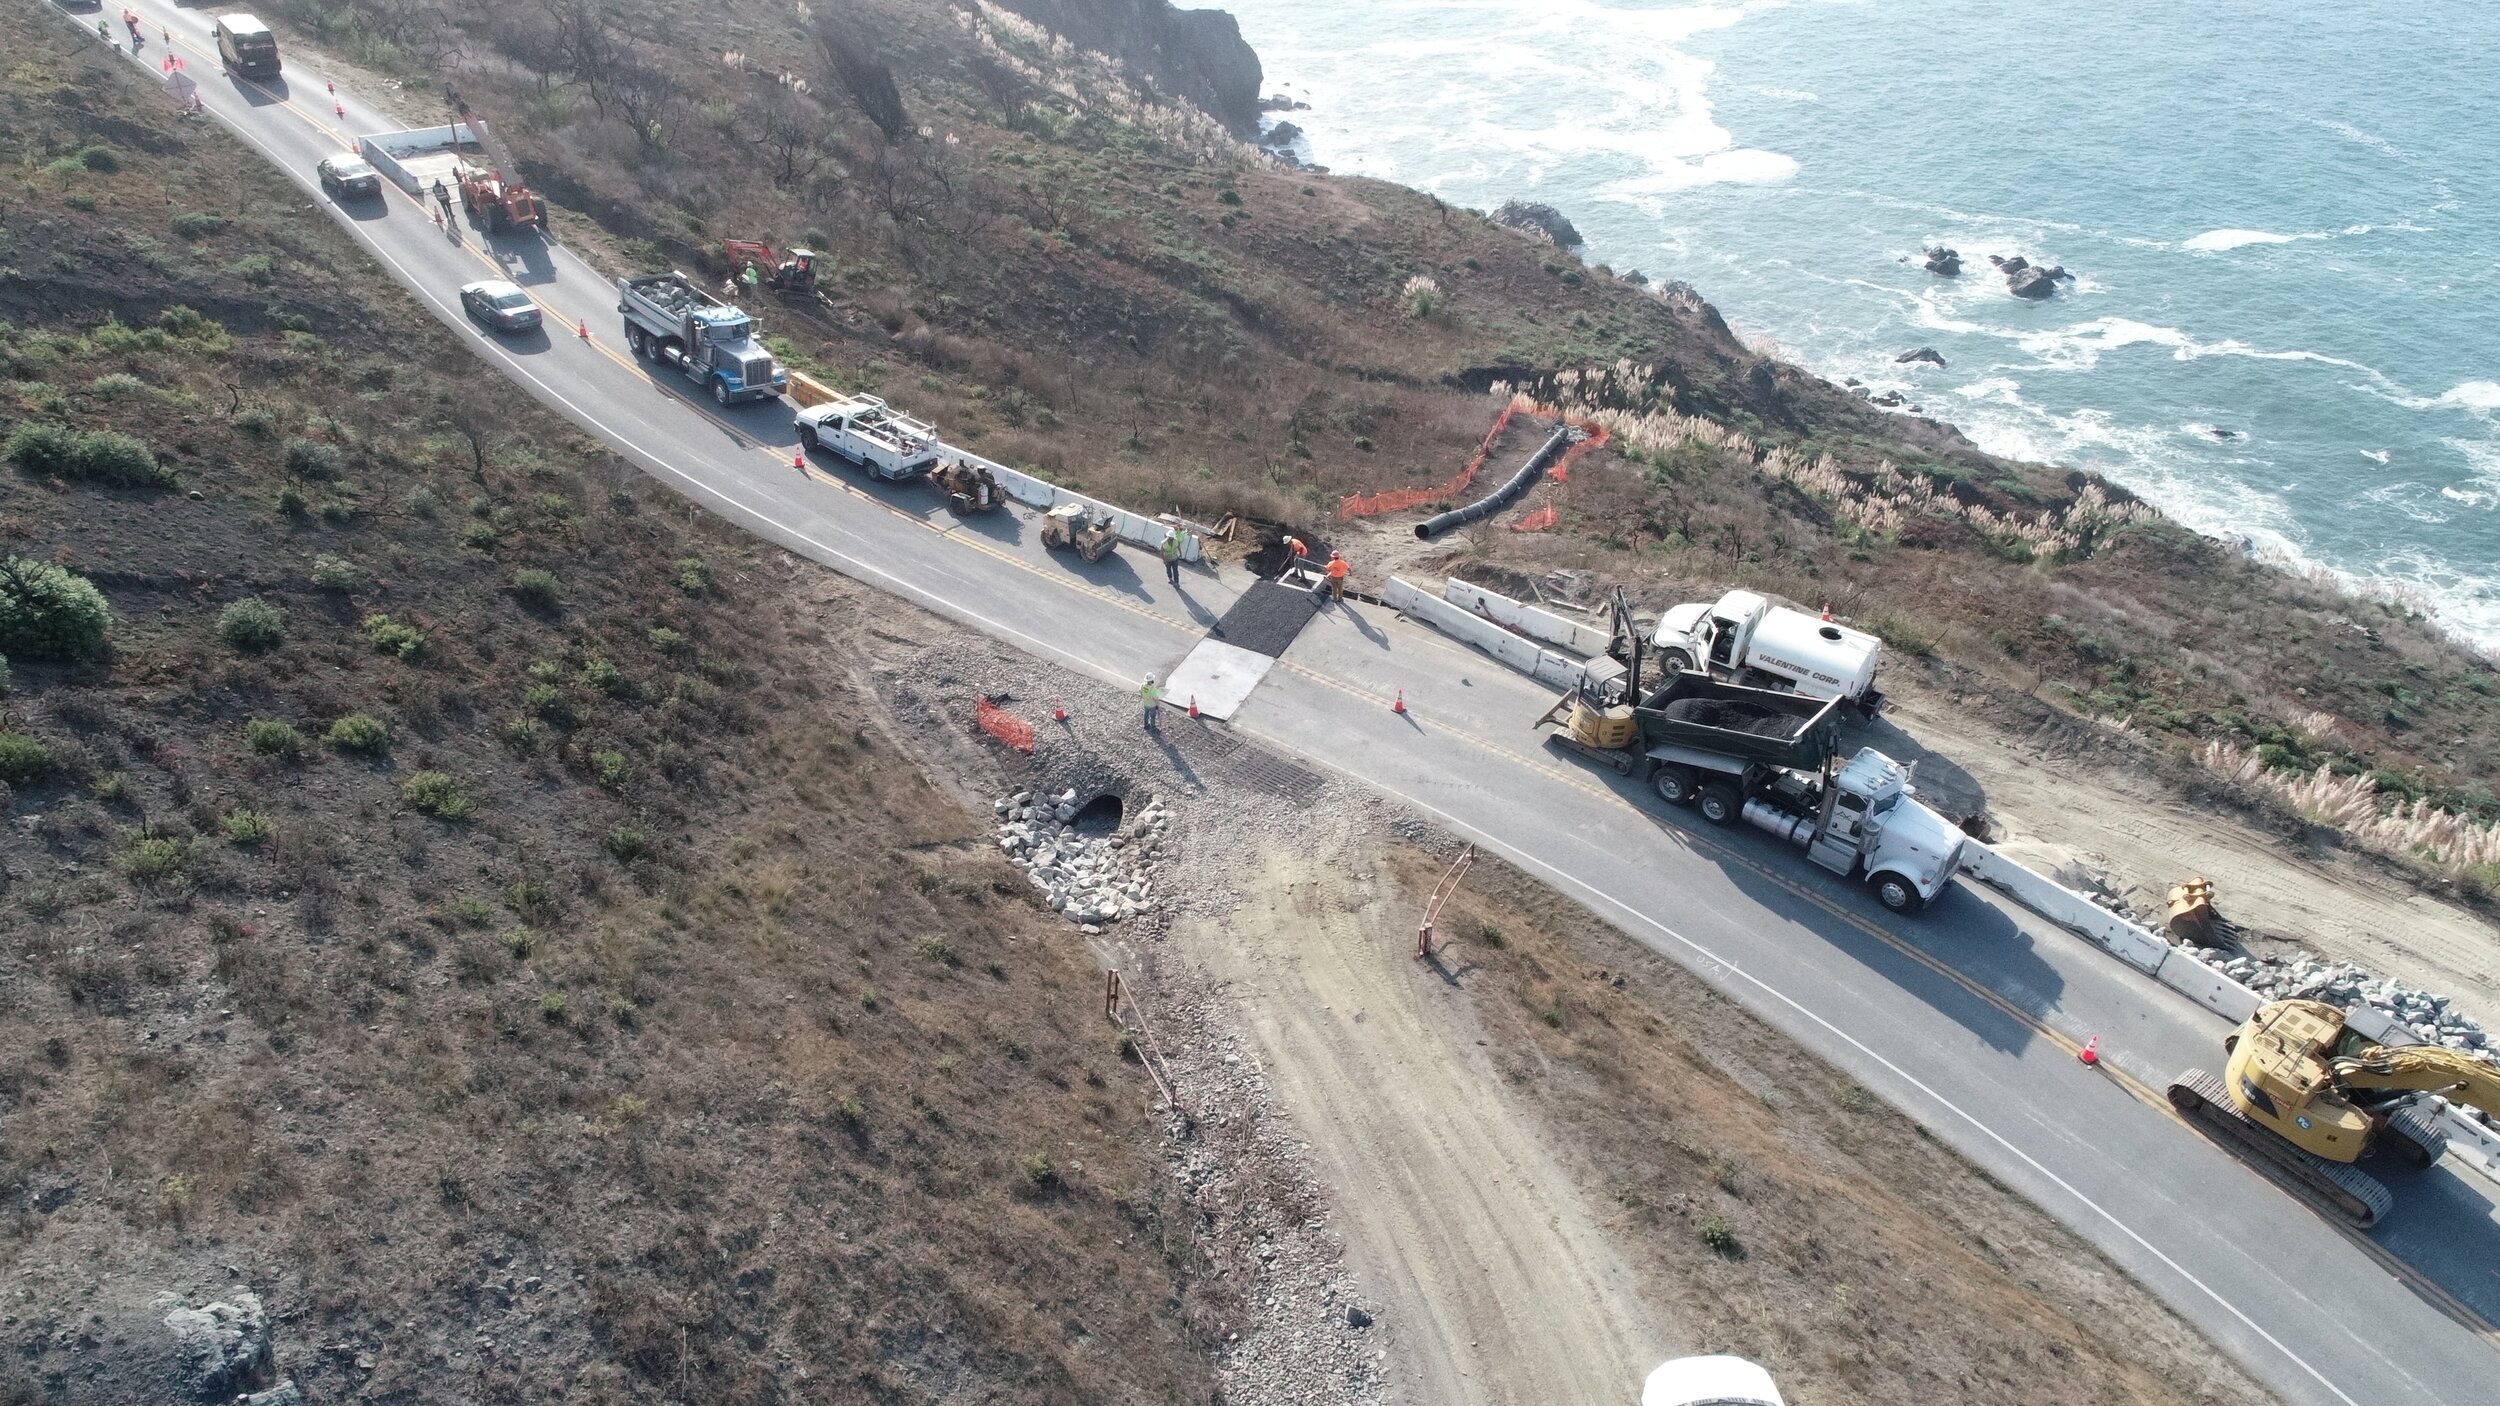   Welcome To Valentine Corporation   Project: Caltrans Stinson Beach  If It's Difficult Or Unusual, Call Us!   Contact Us  